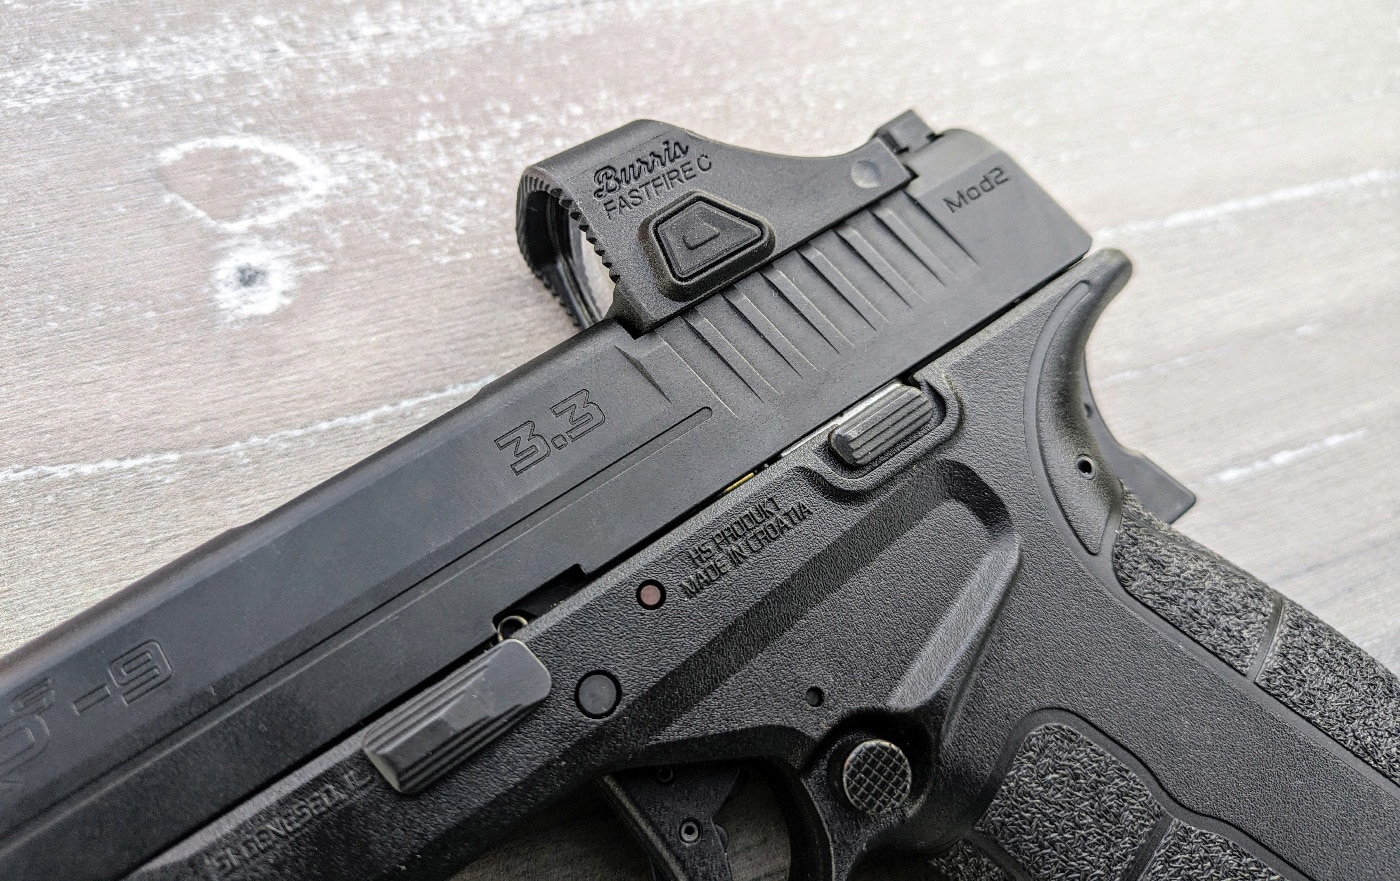 In this photo, we see a Burris FastFire C red dot sight mounted on a Springfield Armory xd-s 9mm pistol. The red dot sight works great on a semi-automatic handgun intended for concealed carry.